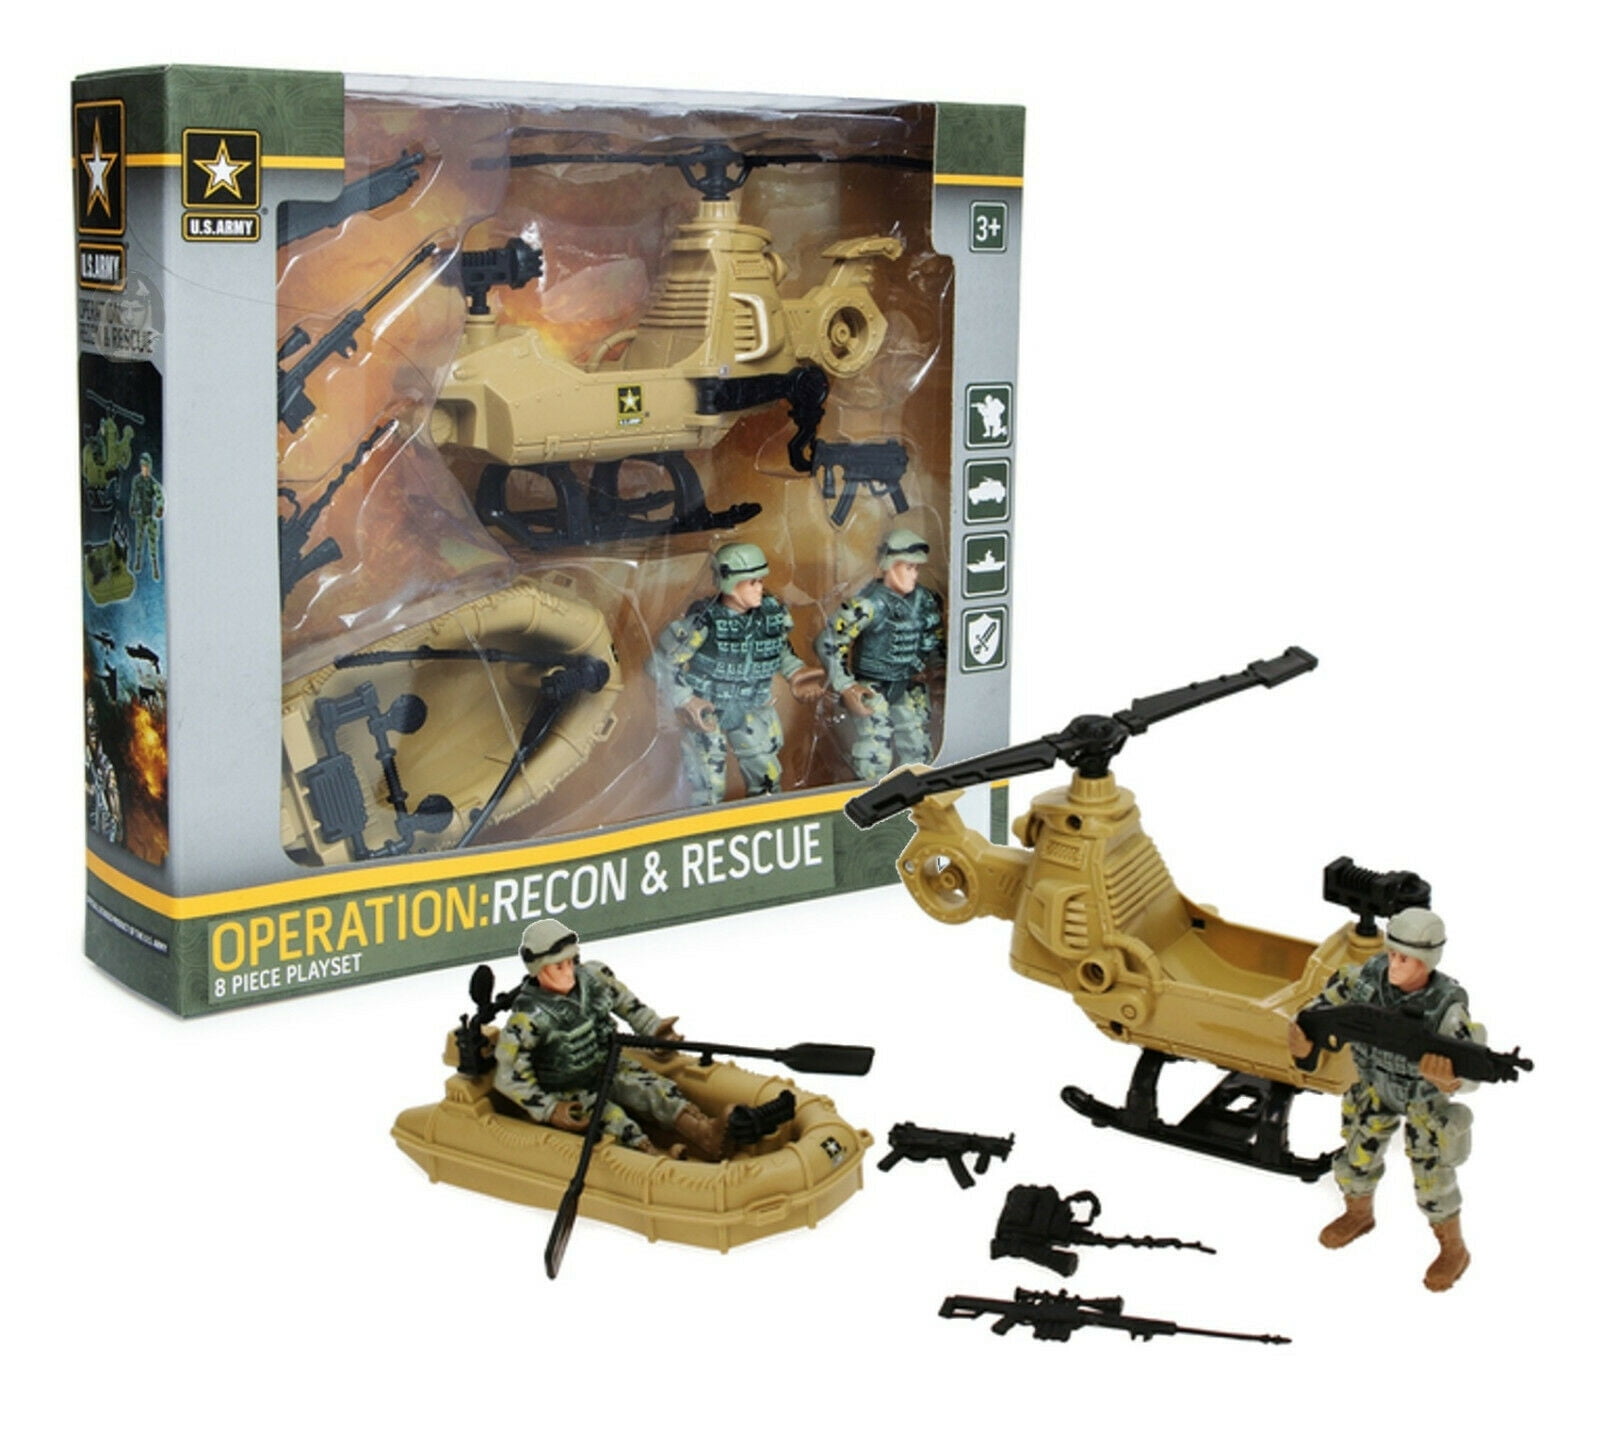 U.S Army Desert Forces Playset Toys Action Figures Weapons Off Road Vehicle 